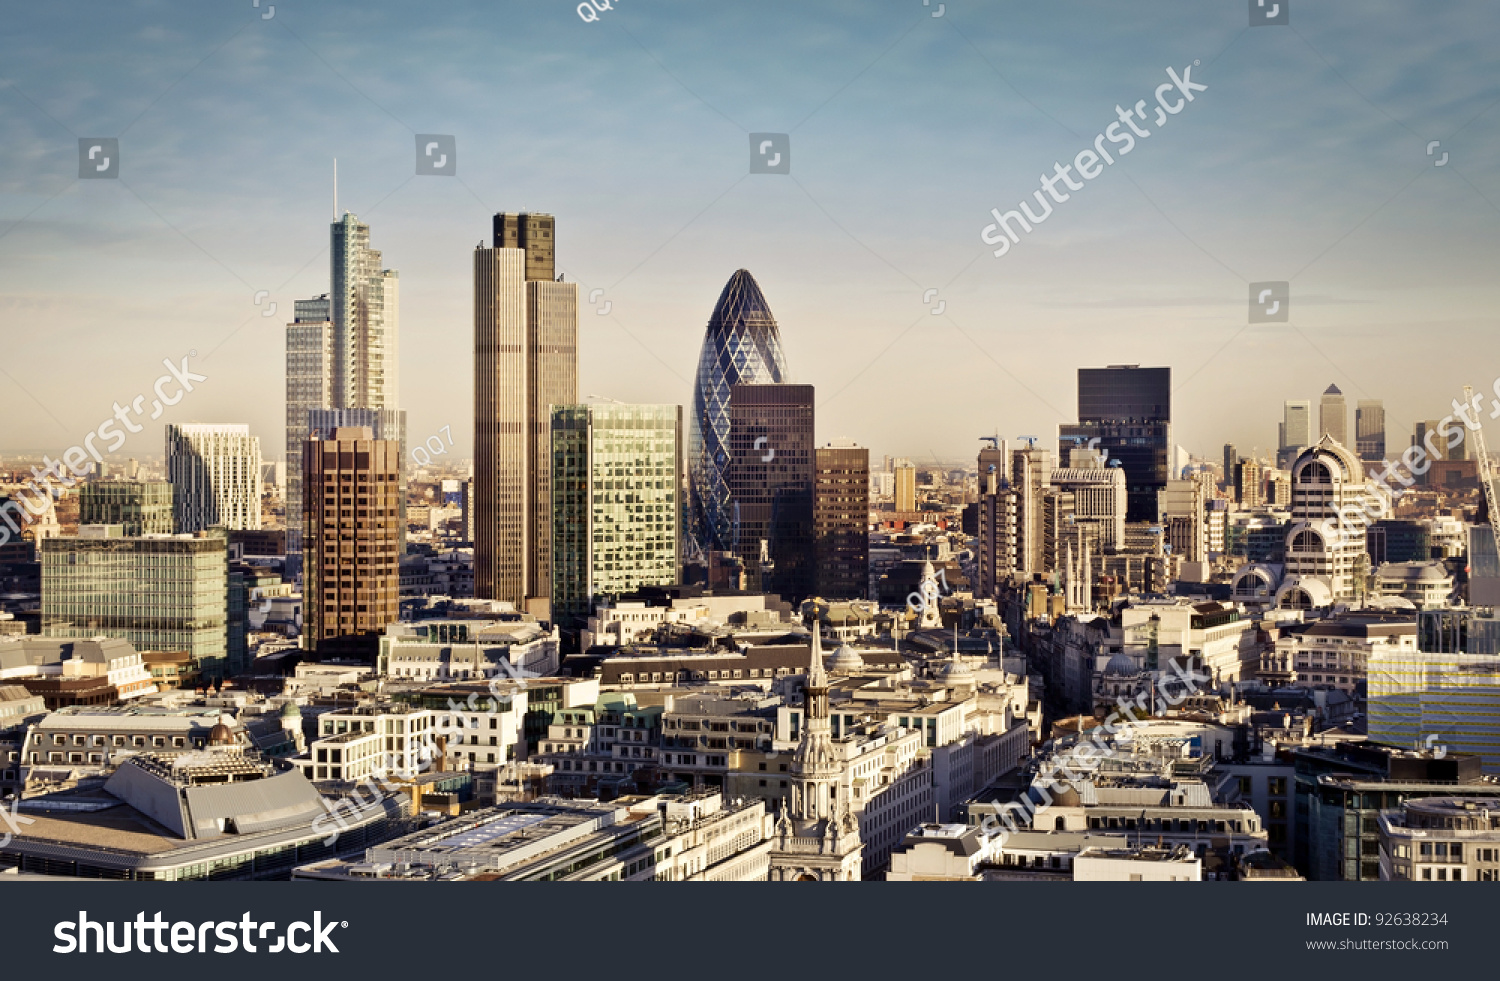 City of London one of the leading centers of global finance and Canary Wharf at the background. #92638234